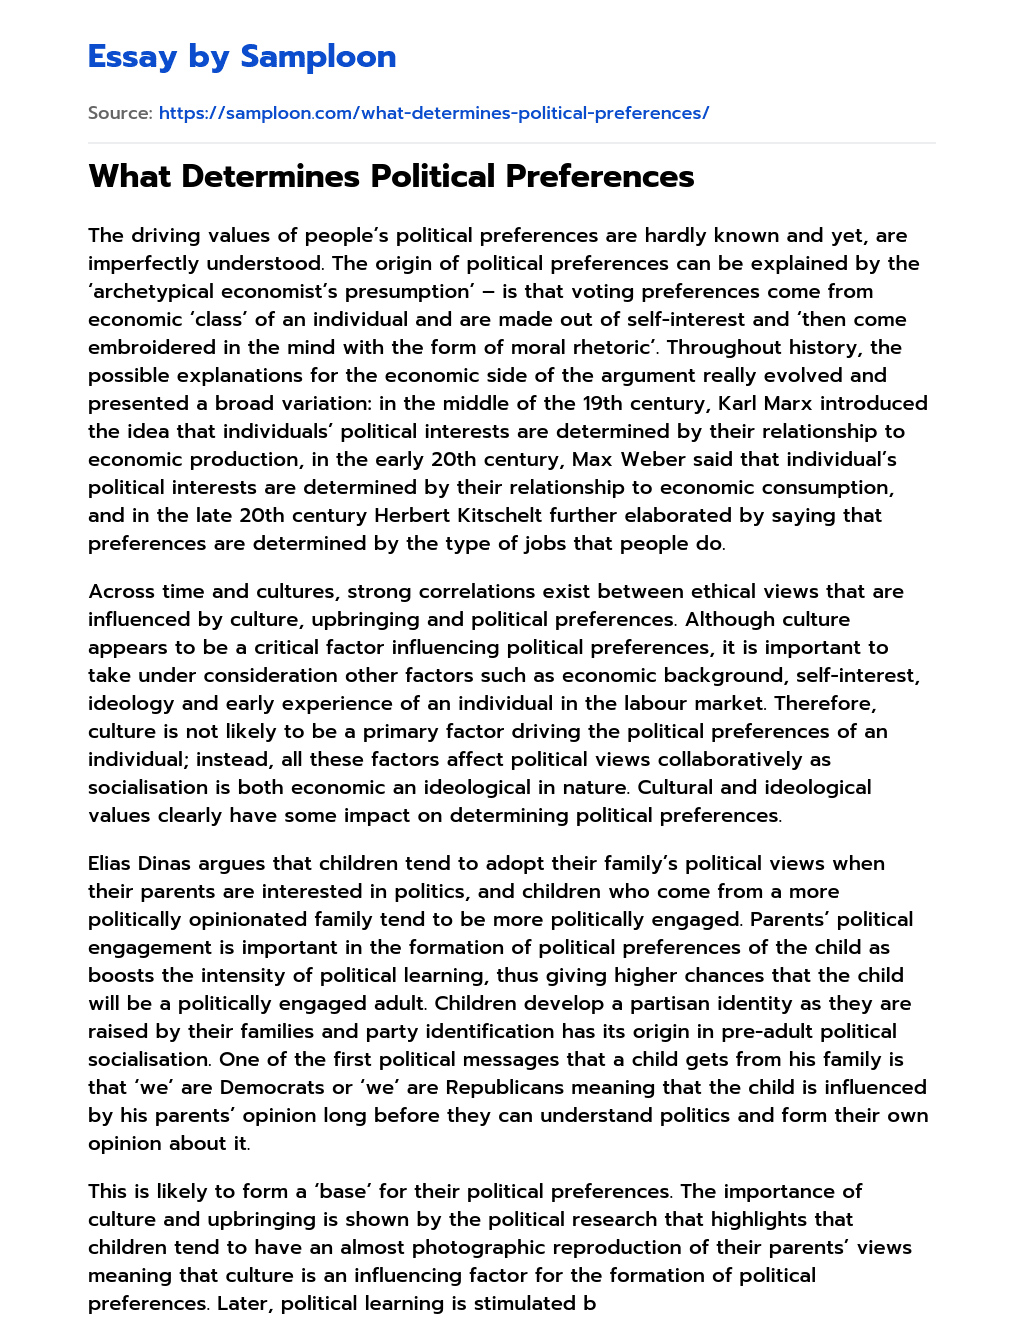 What Determines Political Preferences essay